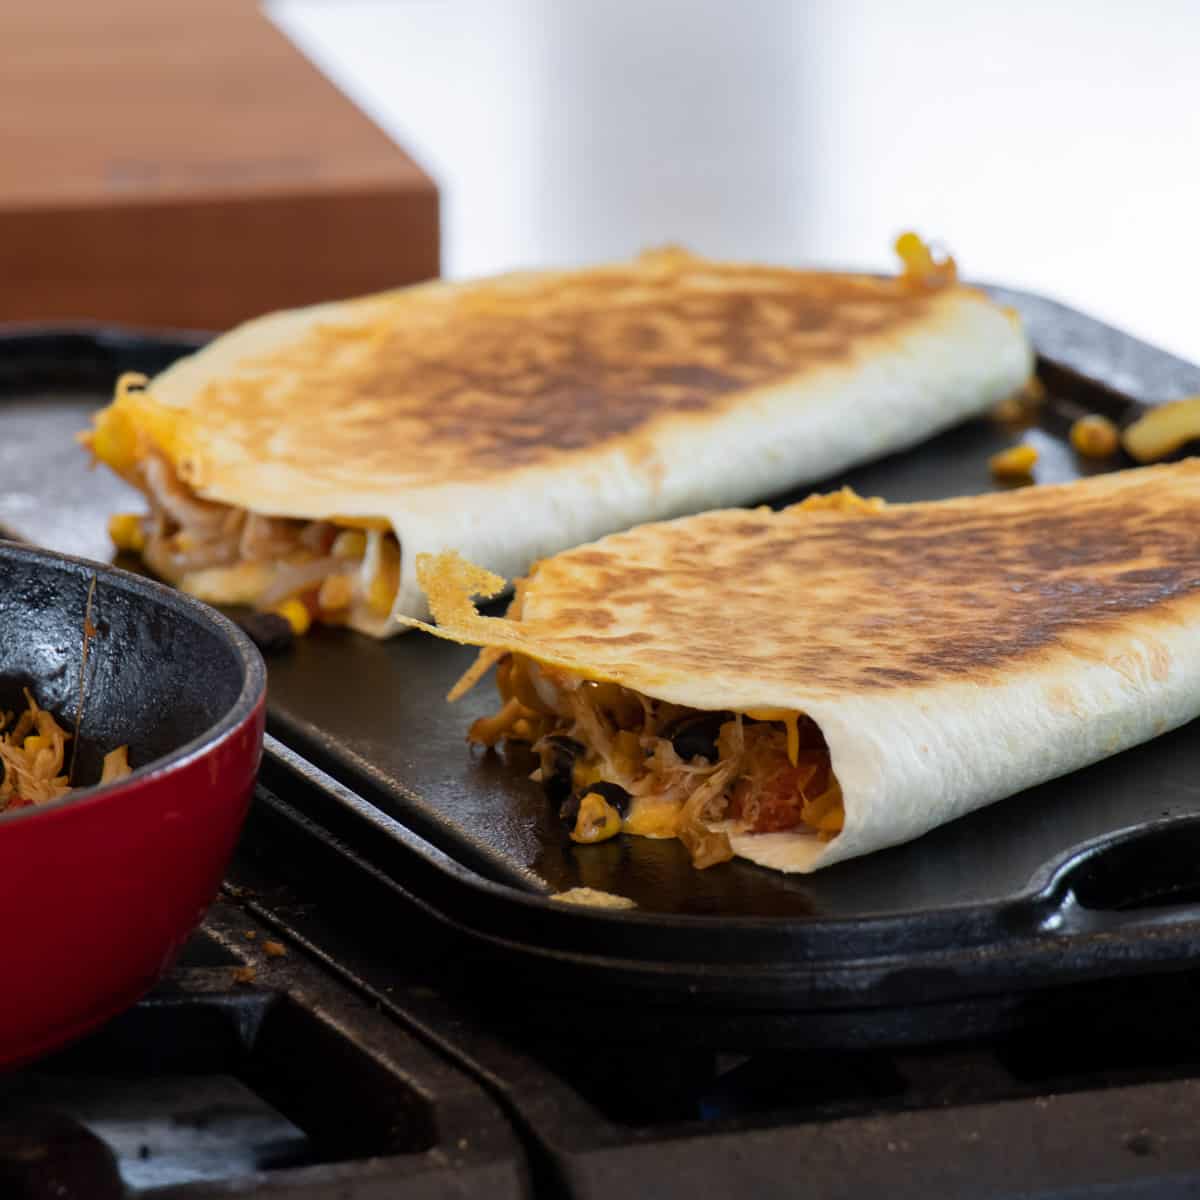 Frying a quesadilla on a griddle.